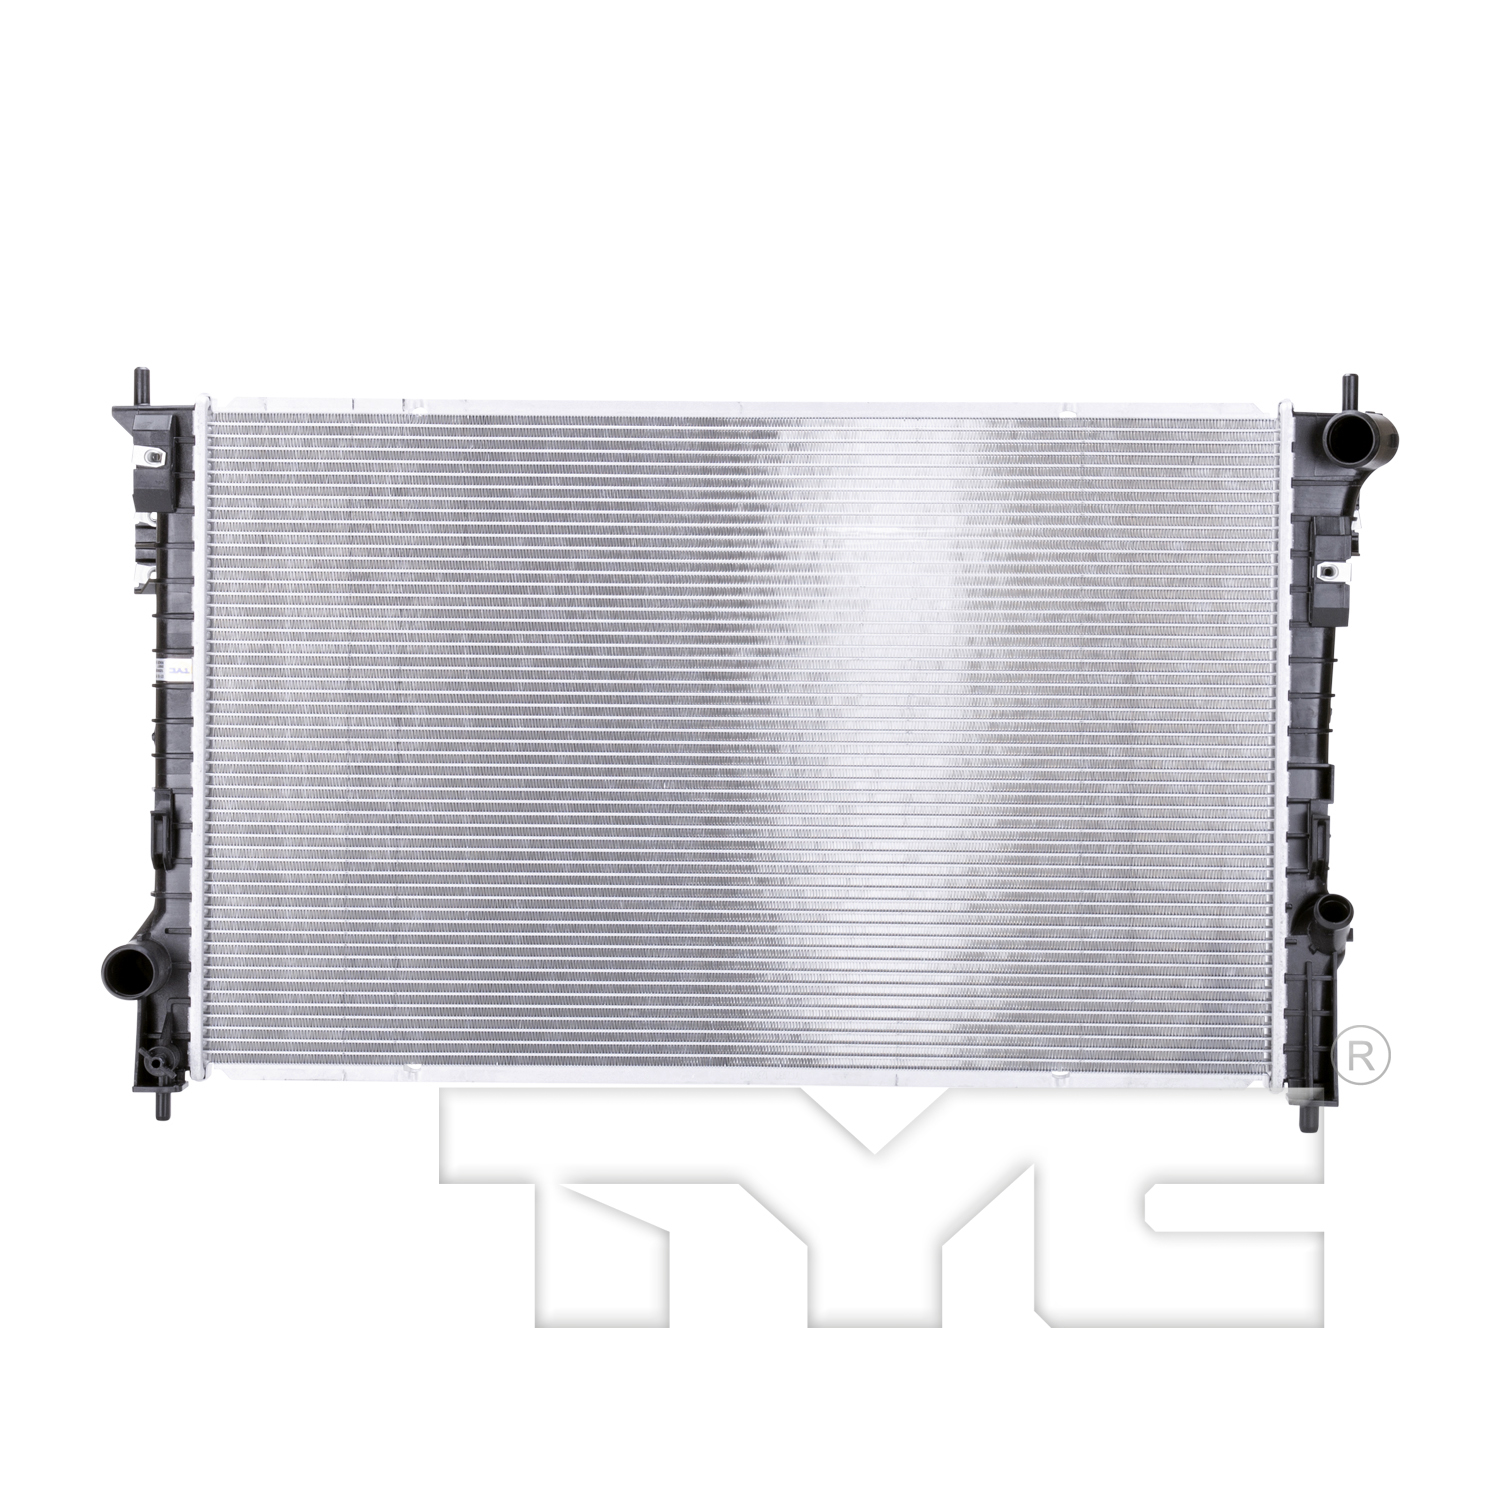 Aftermarket RADIATORS for FORD - EDGE, EDGE,07-13,Radiator assembly